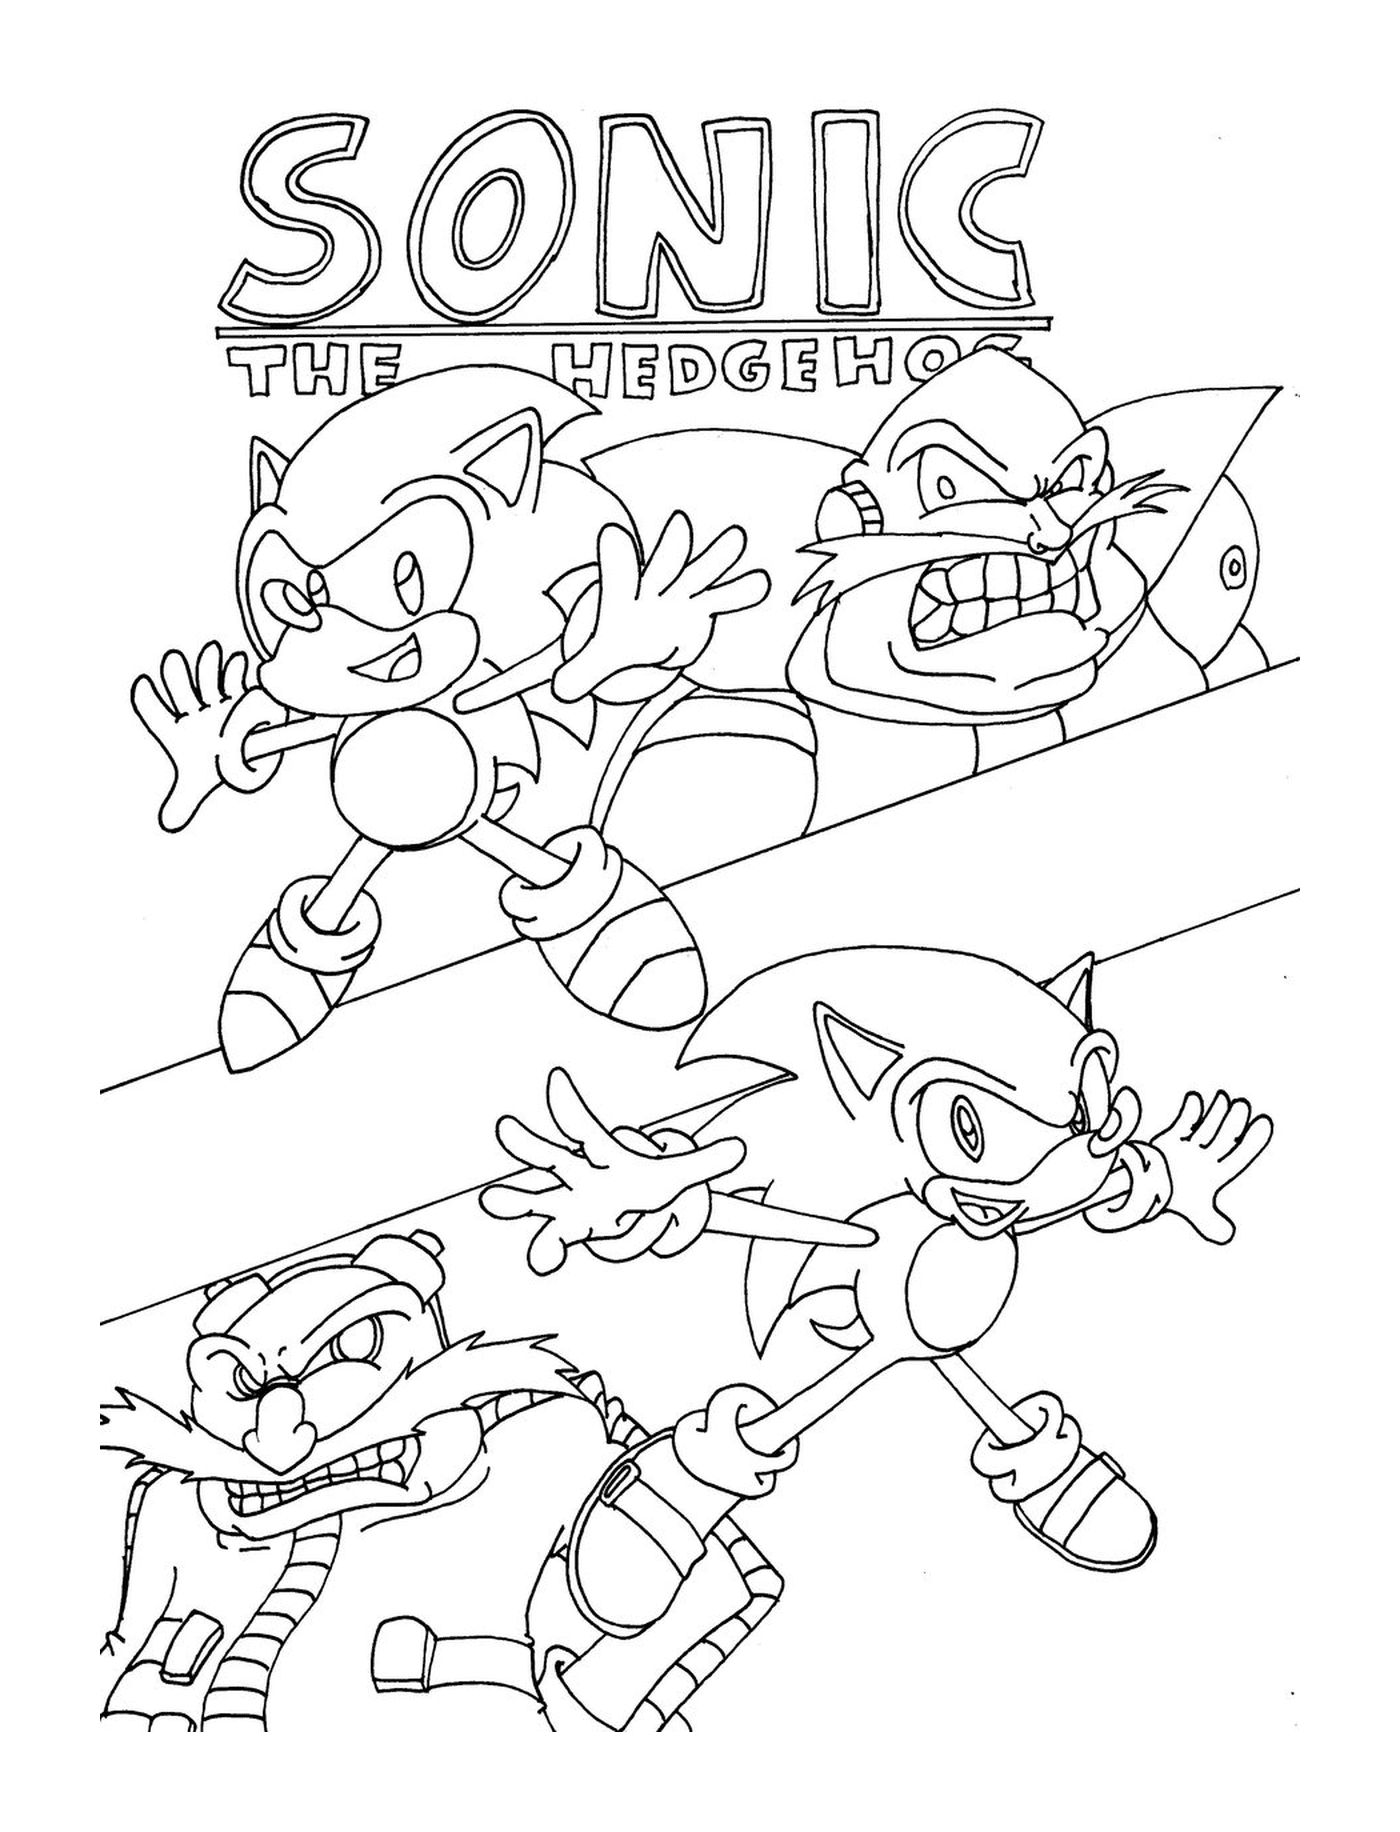  A group of Sonic 